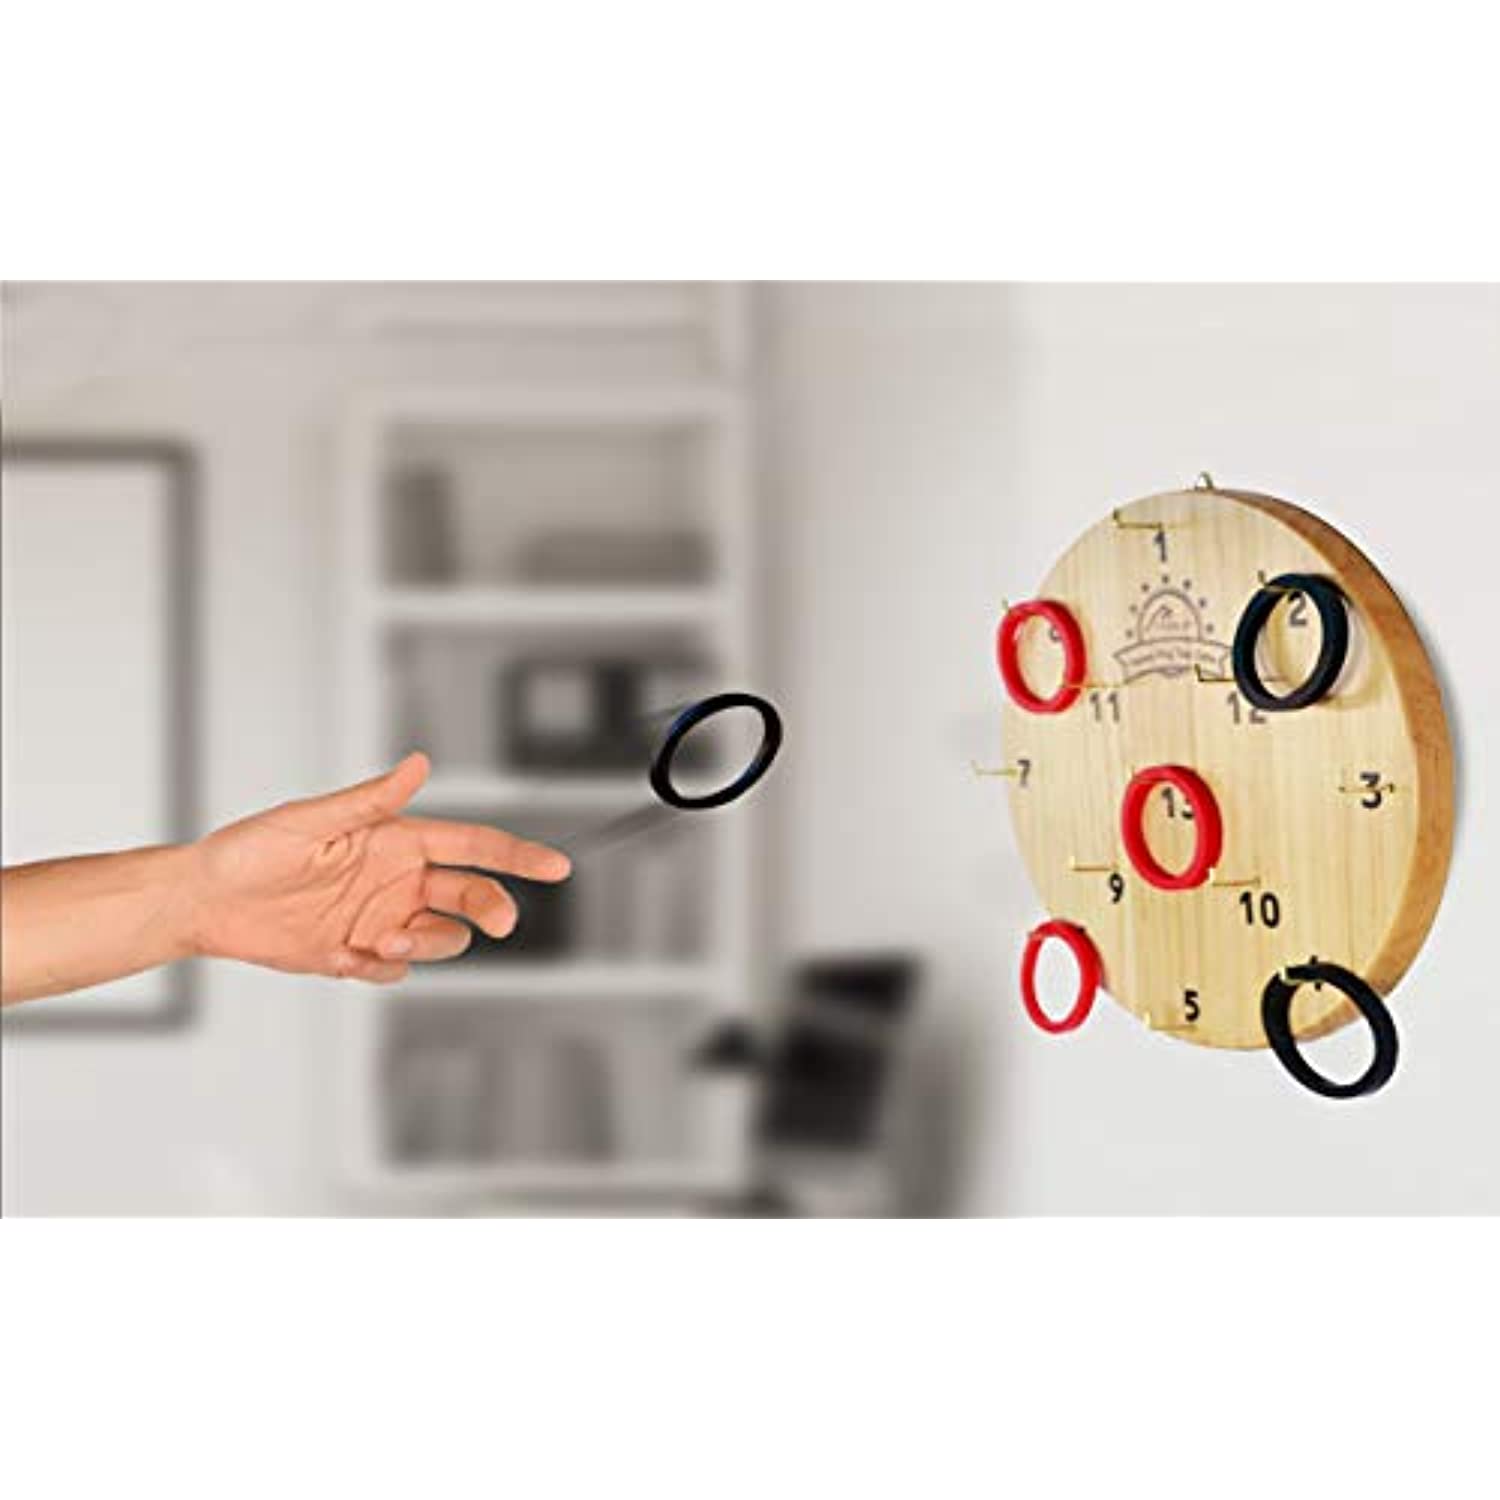 Ring Toss Game with 24 Rings. Beautifully Finished Mens, Dad, Boys, or Girls Gifts. Just Hang on Wall and Play, Fun Outdoor Games. - image 1 of 8